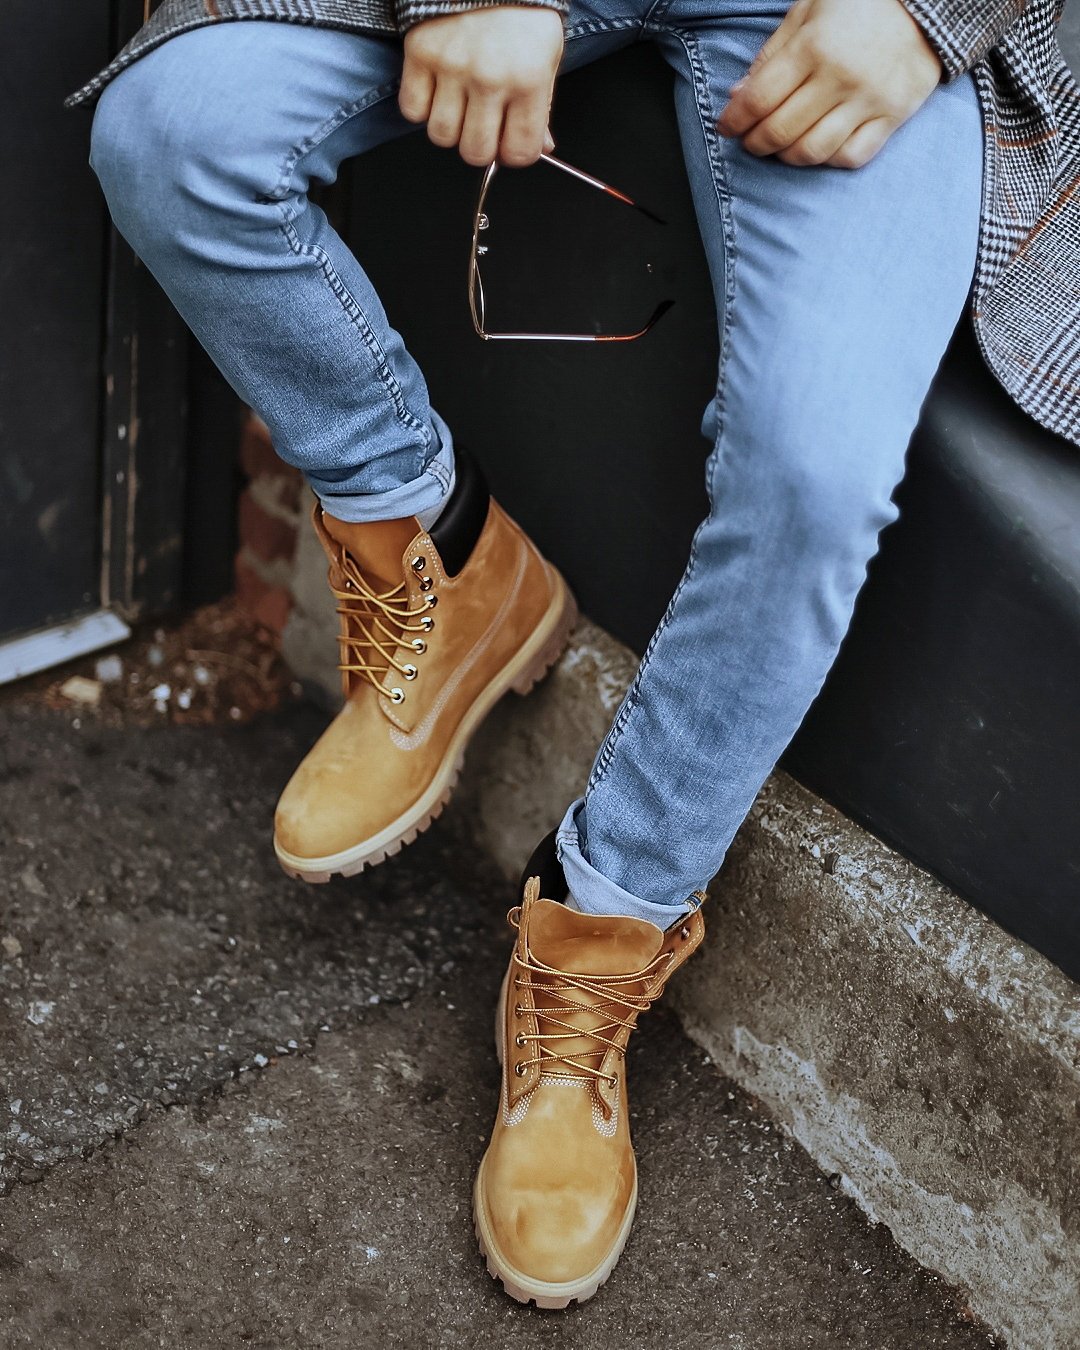 timbs with jeans